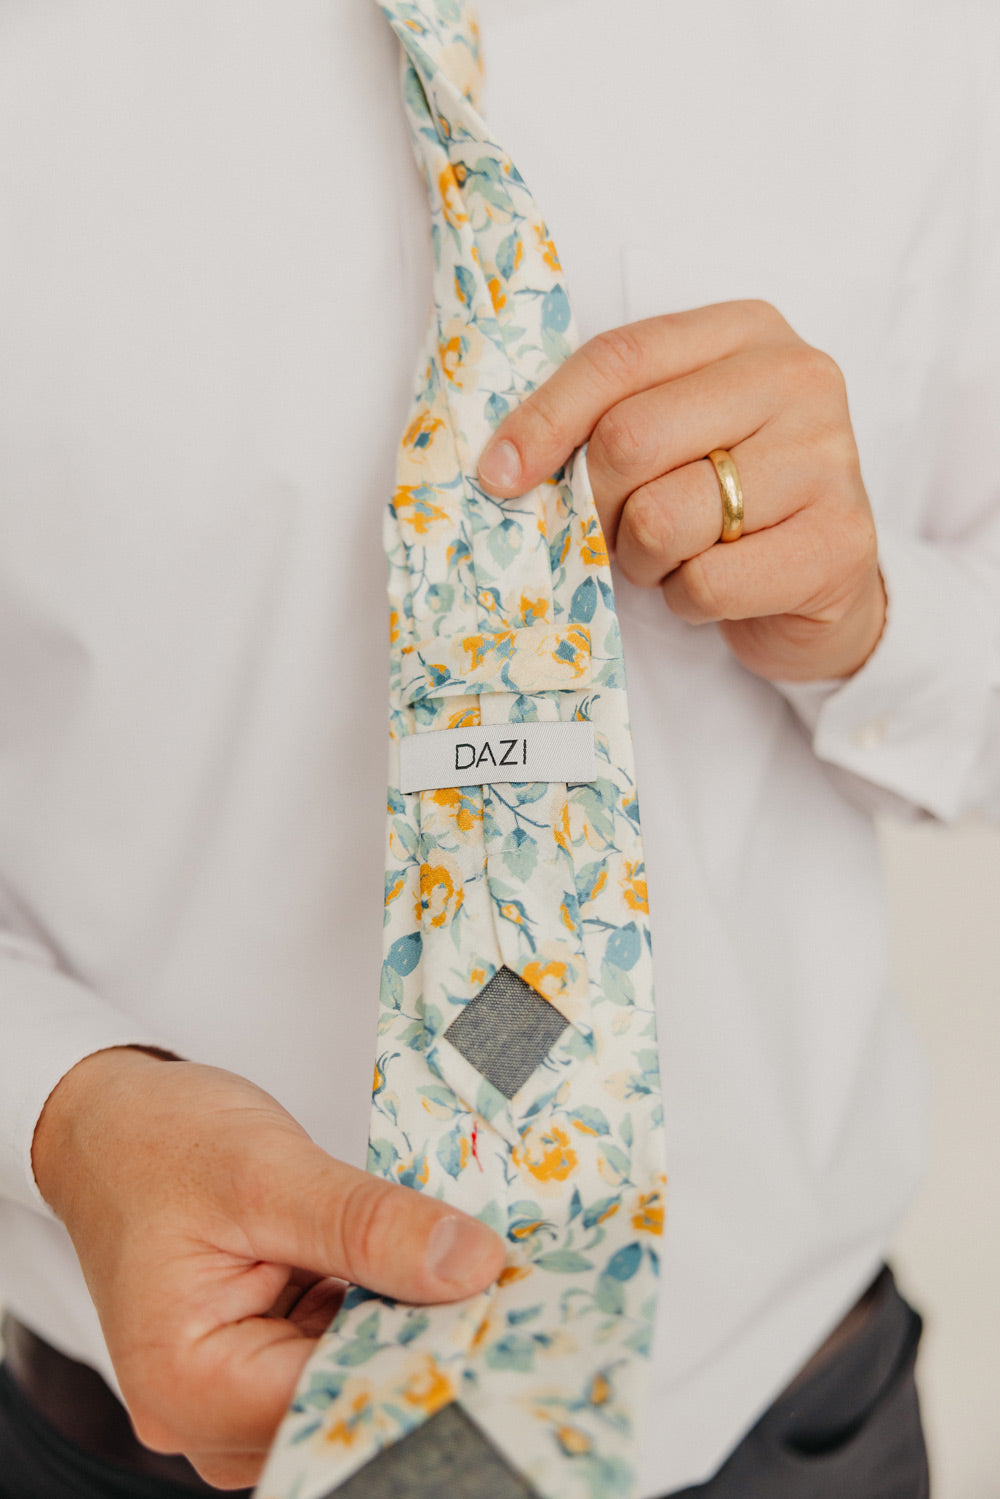 Butterscotch 3" Wide Standard Tie worn with a white shirt, black belt and black suit pants.